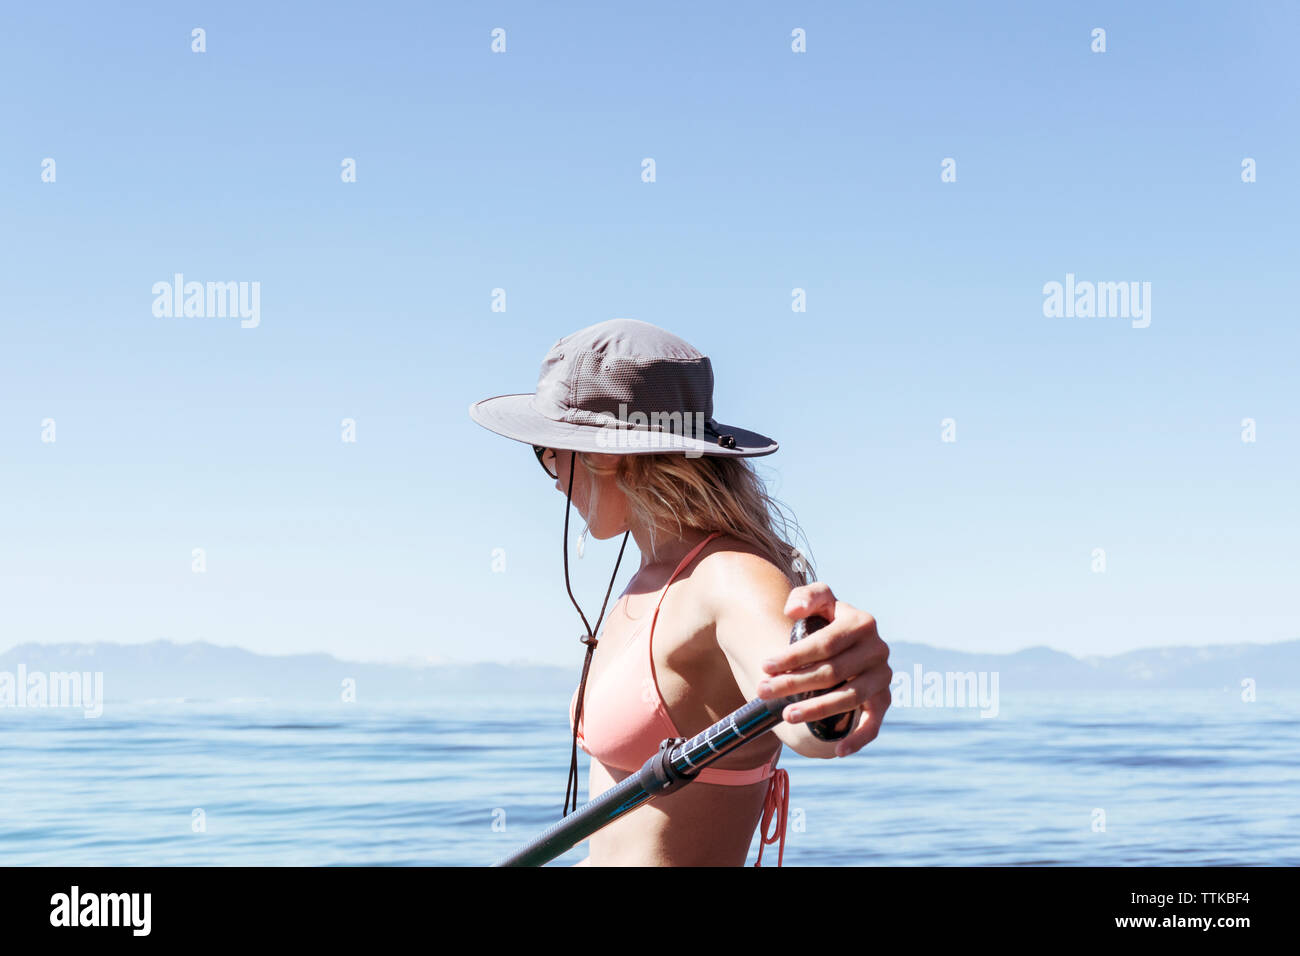 Side view of woman wearing bikini paddleboarding on lake against clear blue sky during sunny day Stock Photo